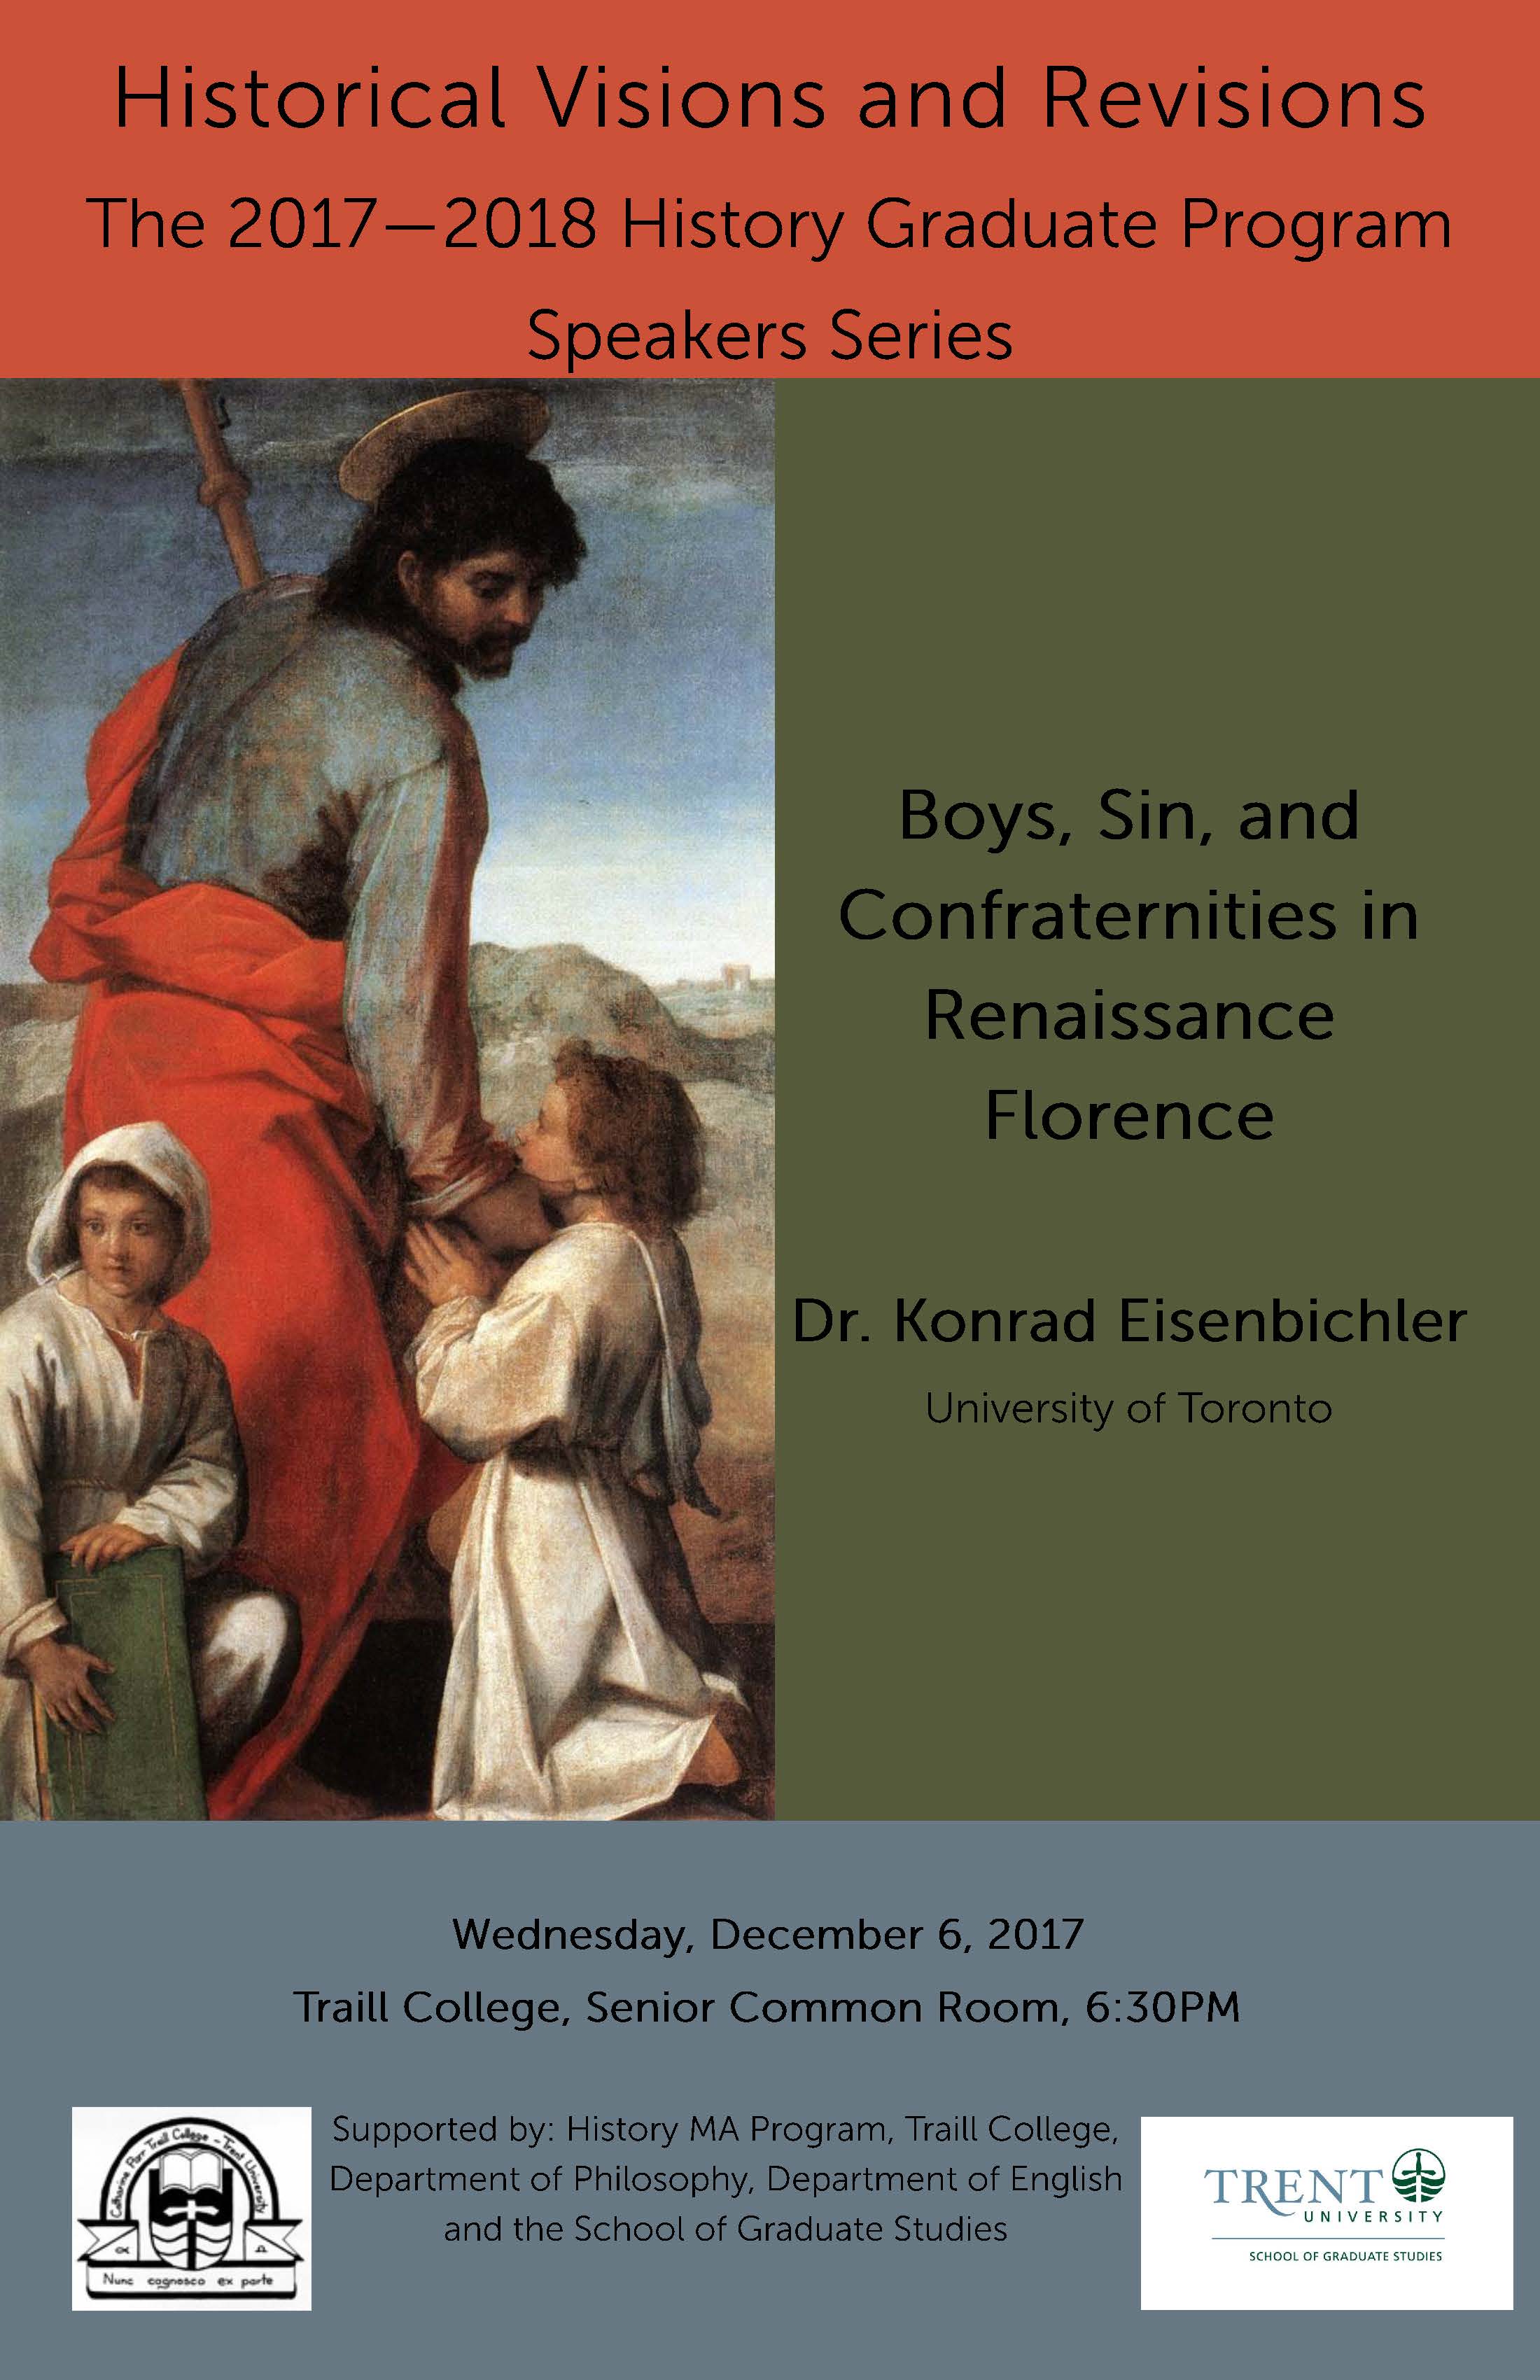 Poster of event. Boys, Sin, and Confraternities in Renaissance Florence